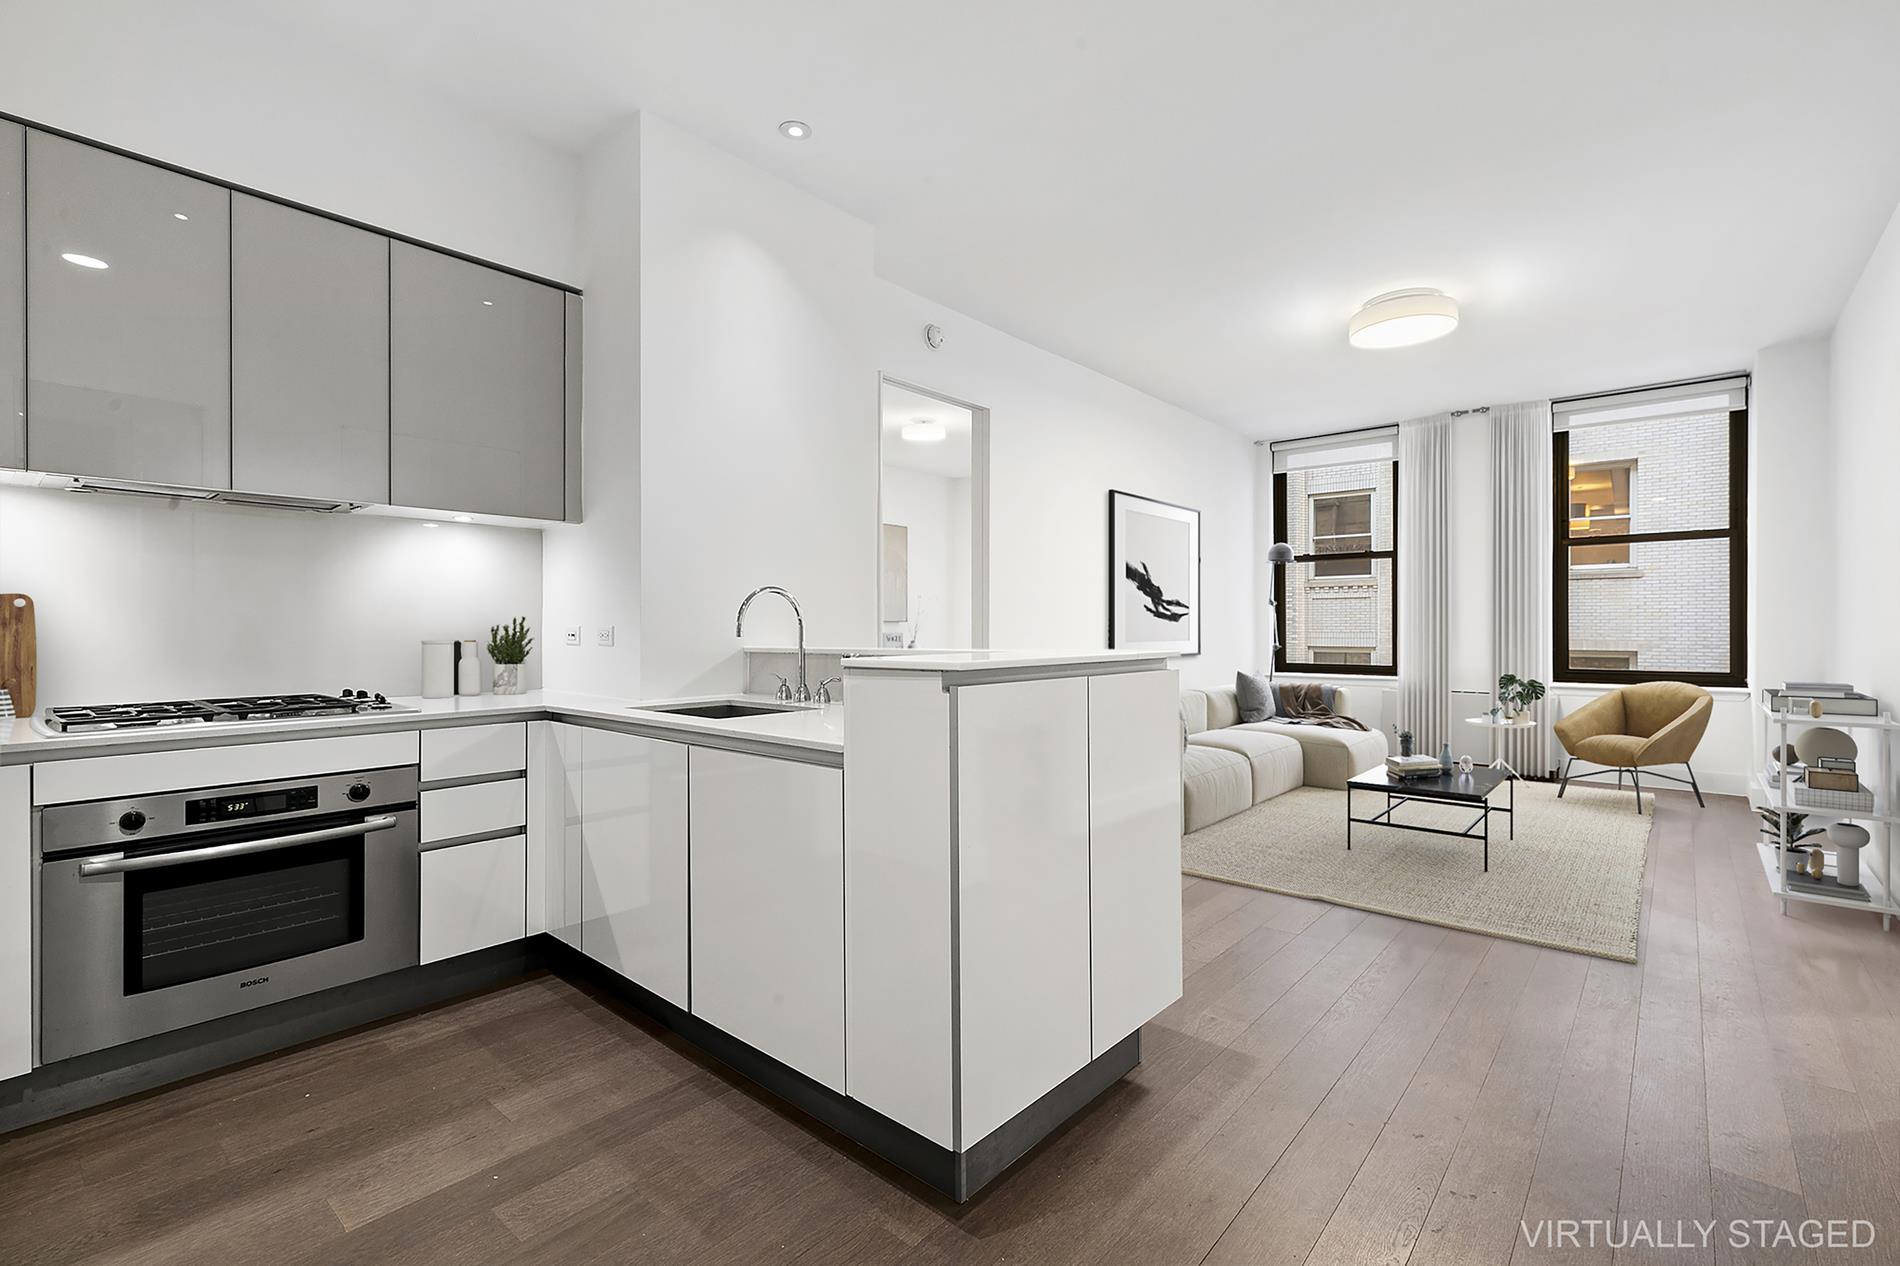 25 Broad Street 15-J, Financial District, Downtown, NYC - 2 Bedrooms  
2 Bathrooms  
4 Rooms - 